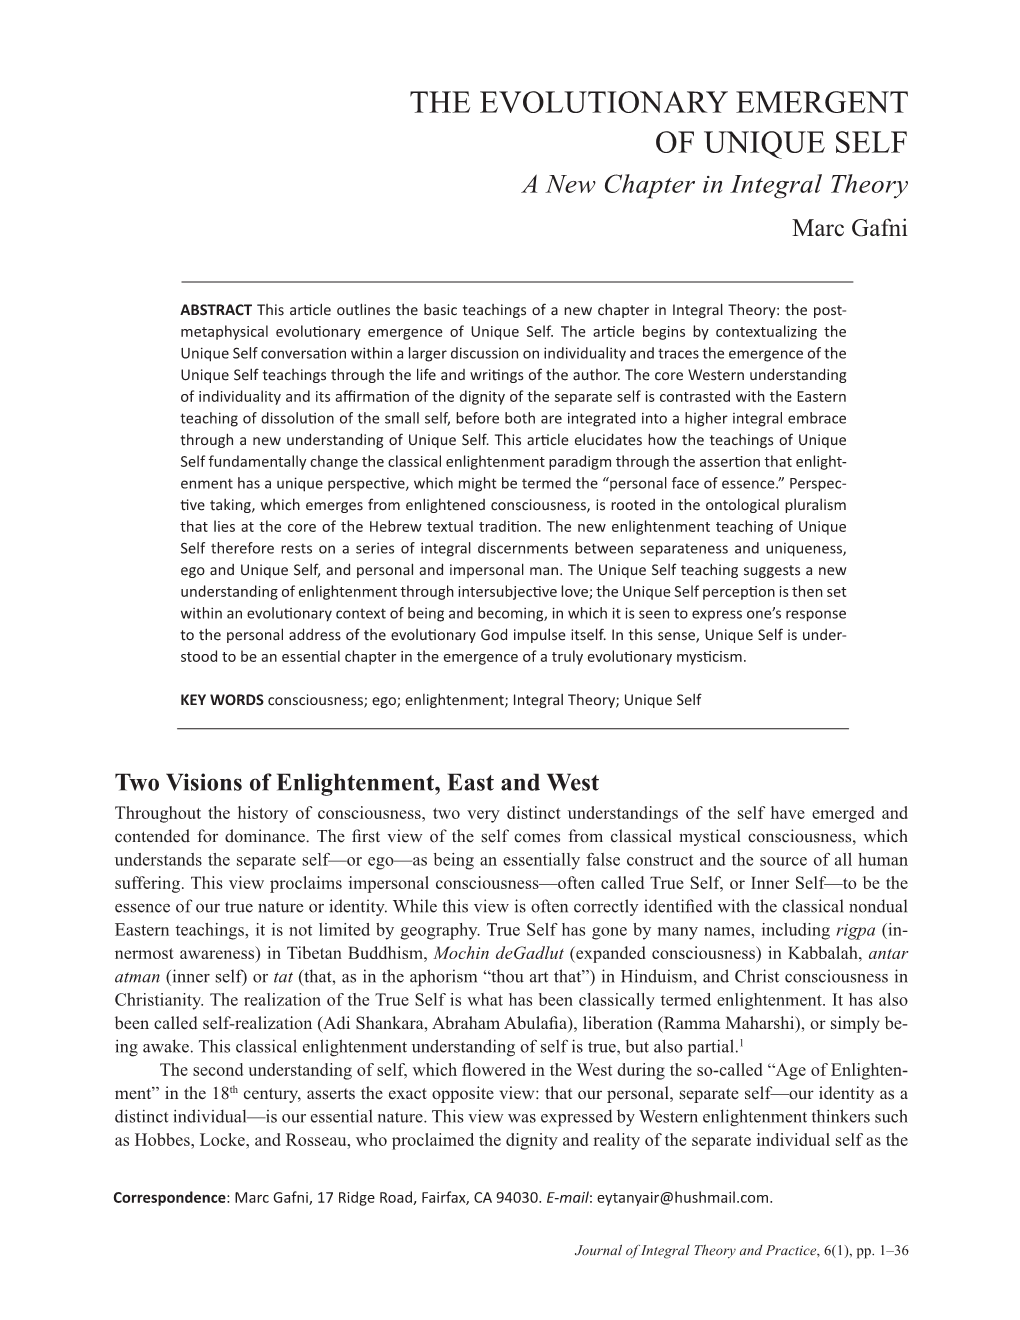 THE EVOLUTIONARY EMERGENT of UNIQUE SELF a New Chapter in Integral Theory Marc Gafni